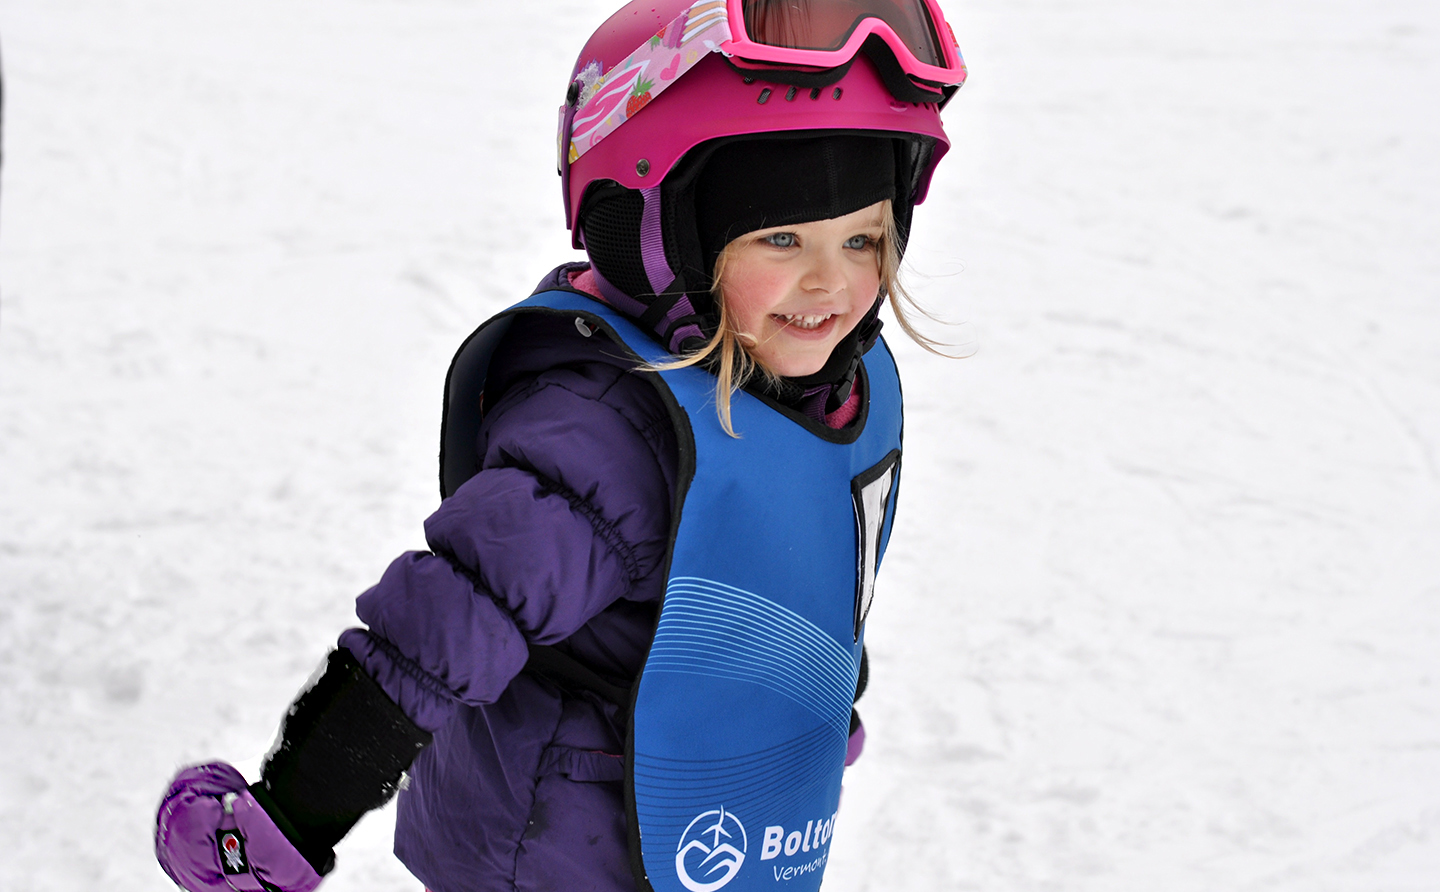 6 Ways to Get the Most Out of Kids' Ski Lessons